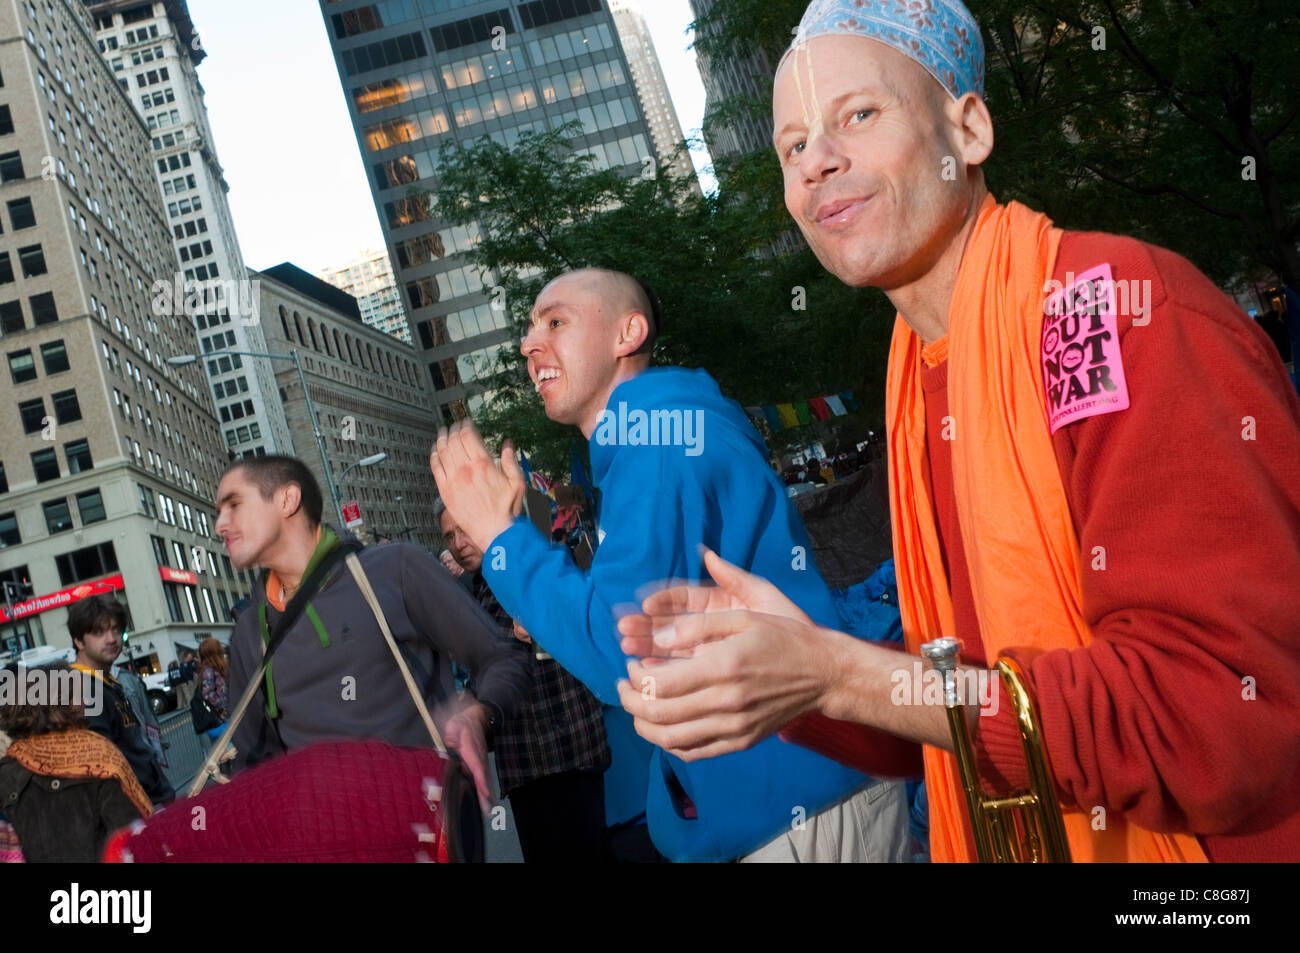 New York, NY -  23 October 2011 - Devotees of Hare Krishna join anti-Wall Street protesters in Liberty Square, Zuccotti Park. Occupy Wall Street Stock Photo